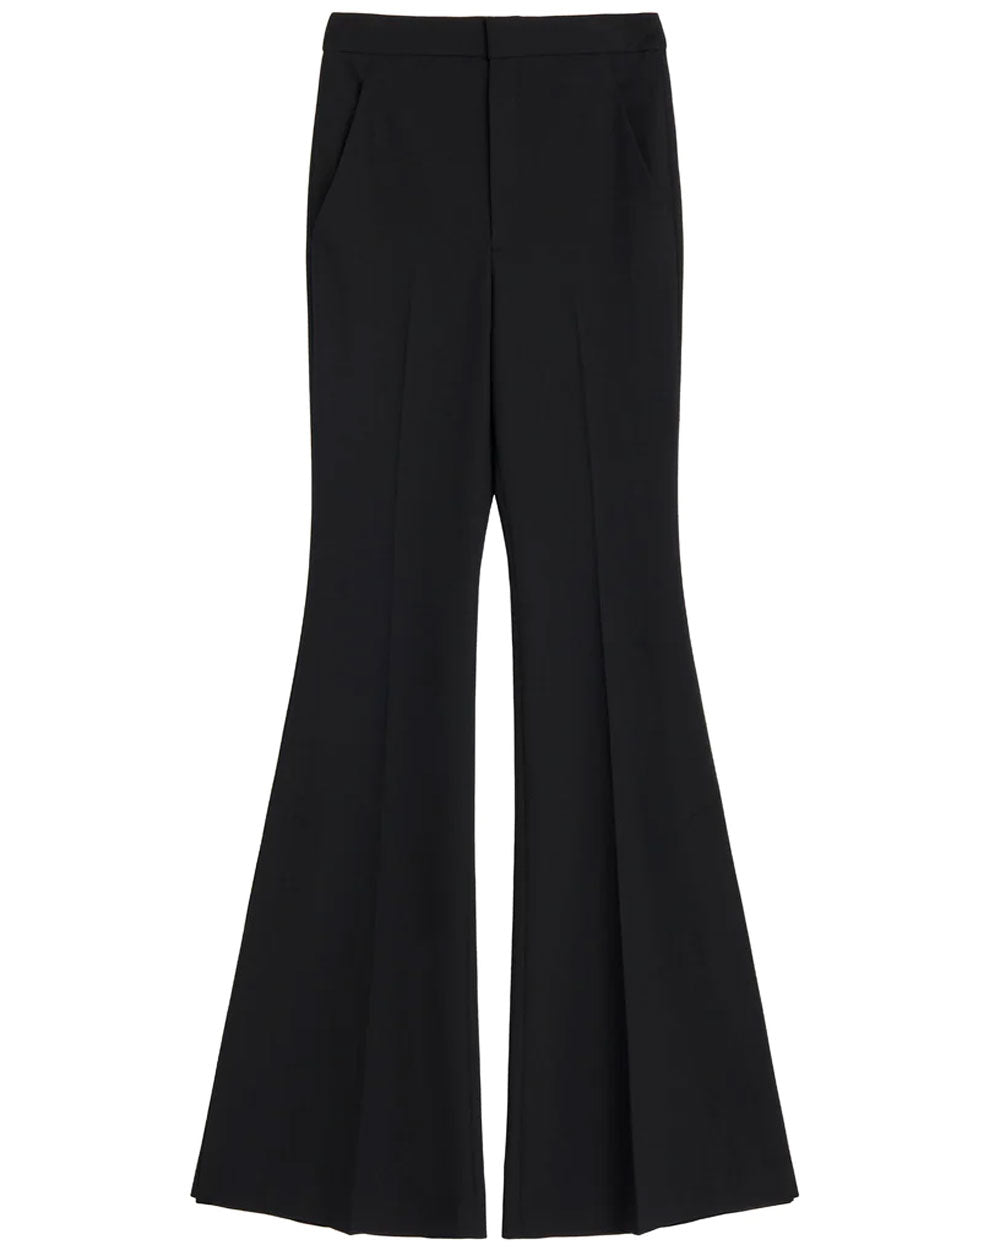 Black Anders High-Rise Flared Pant